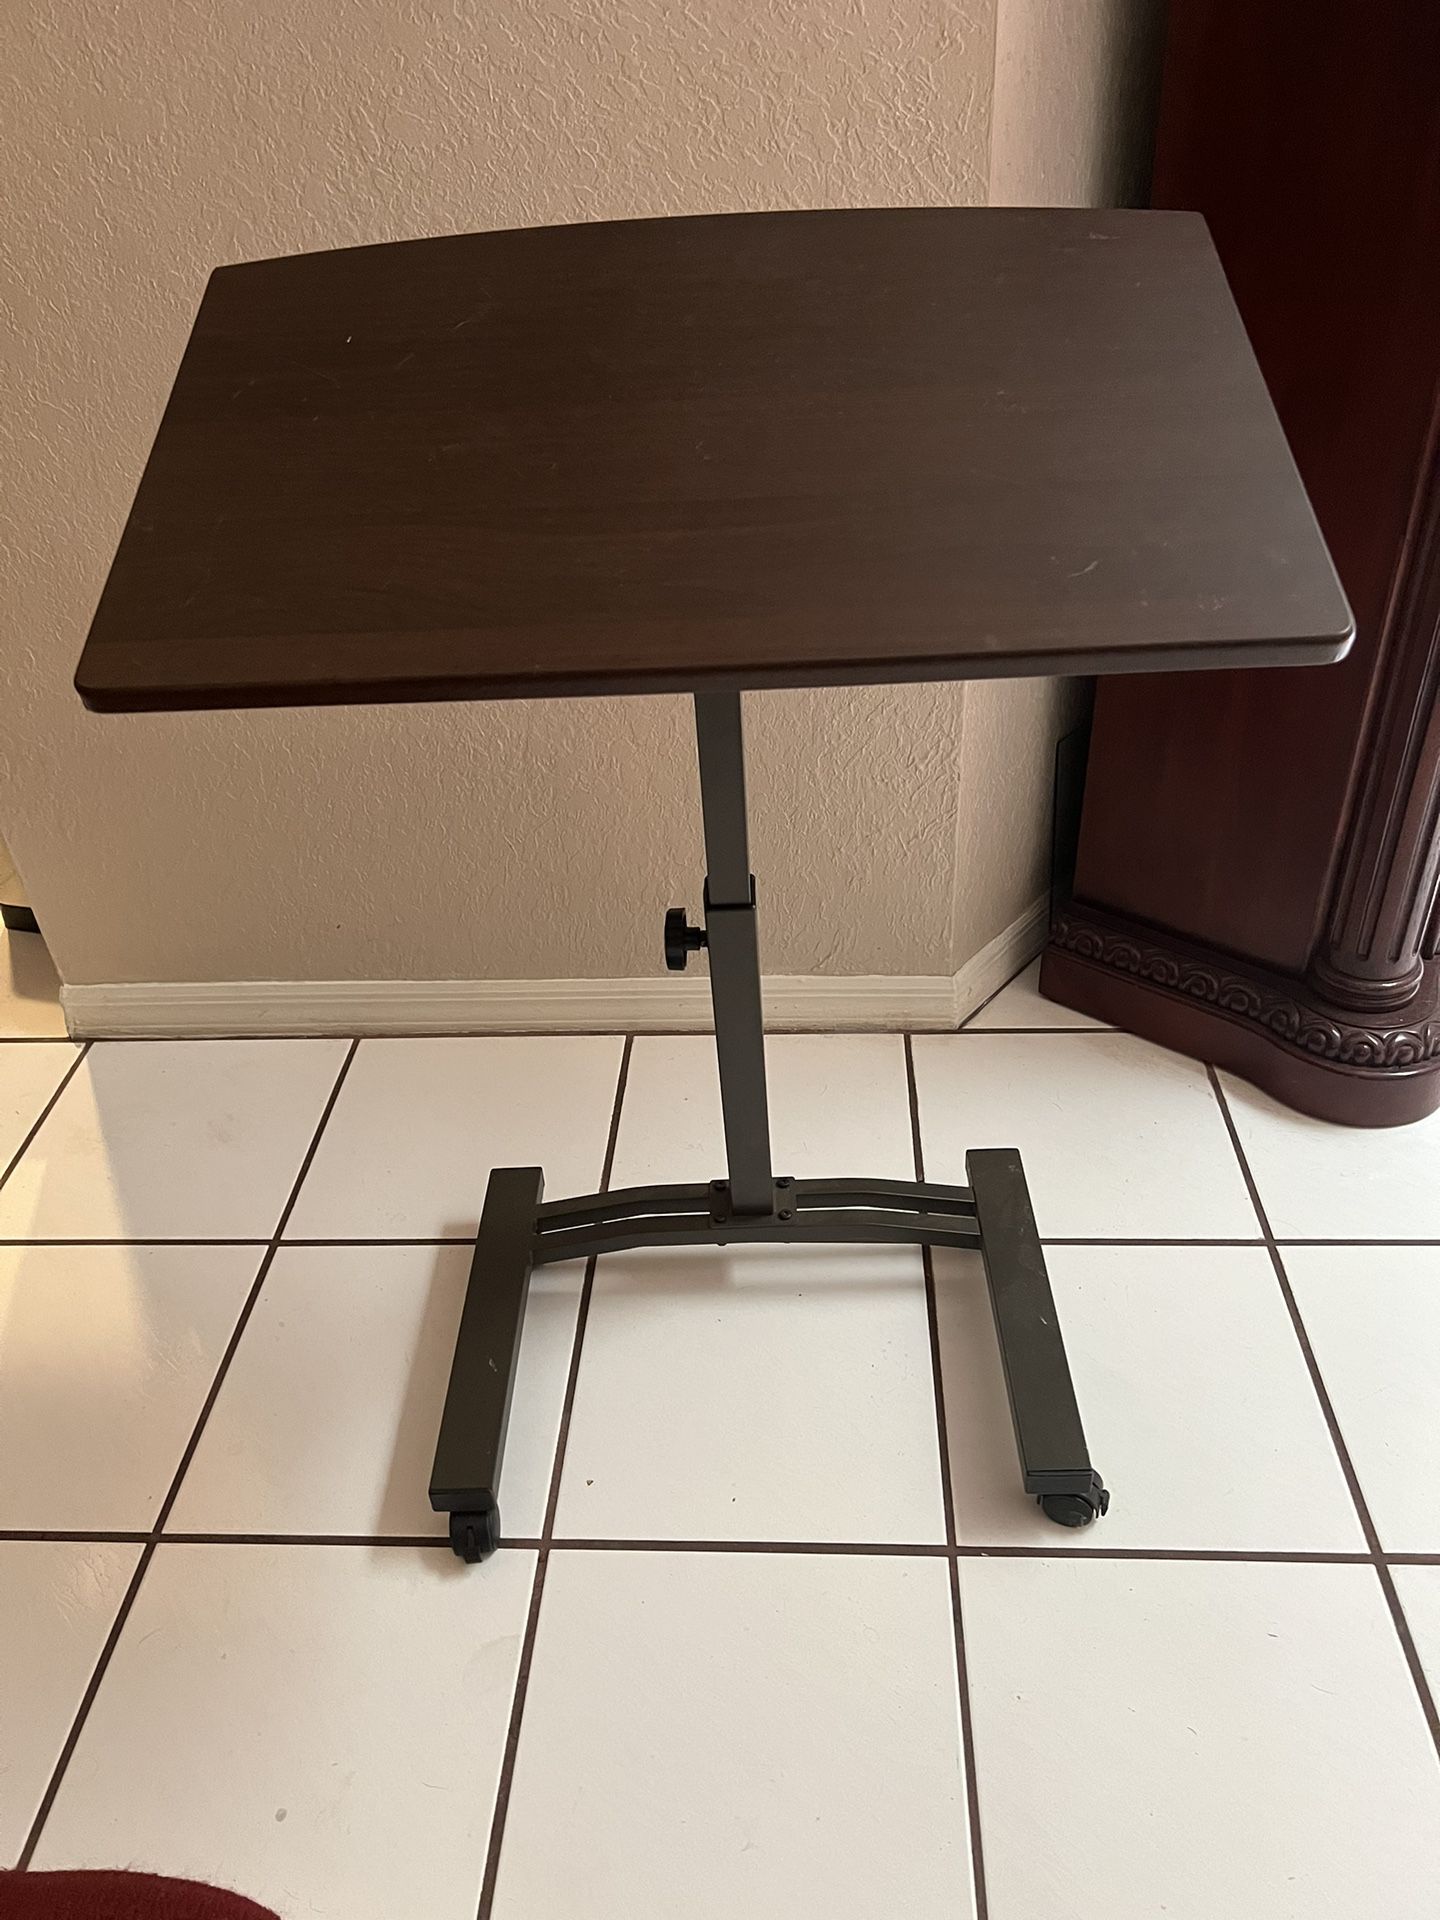 Adjustable Desk Top On Wheels. Tv Couch Table. Lecture Stand.